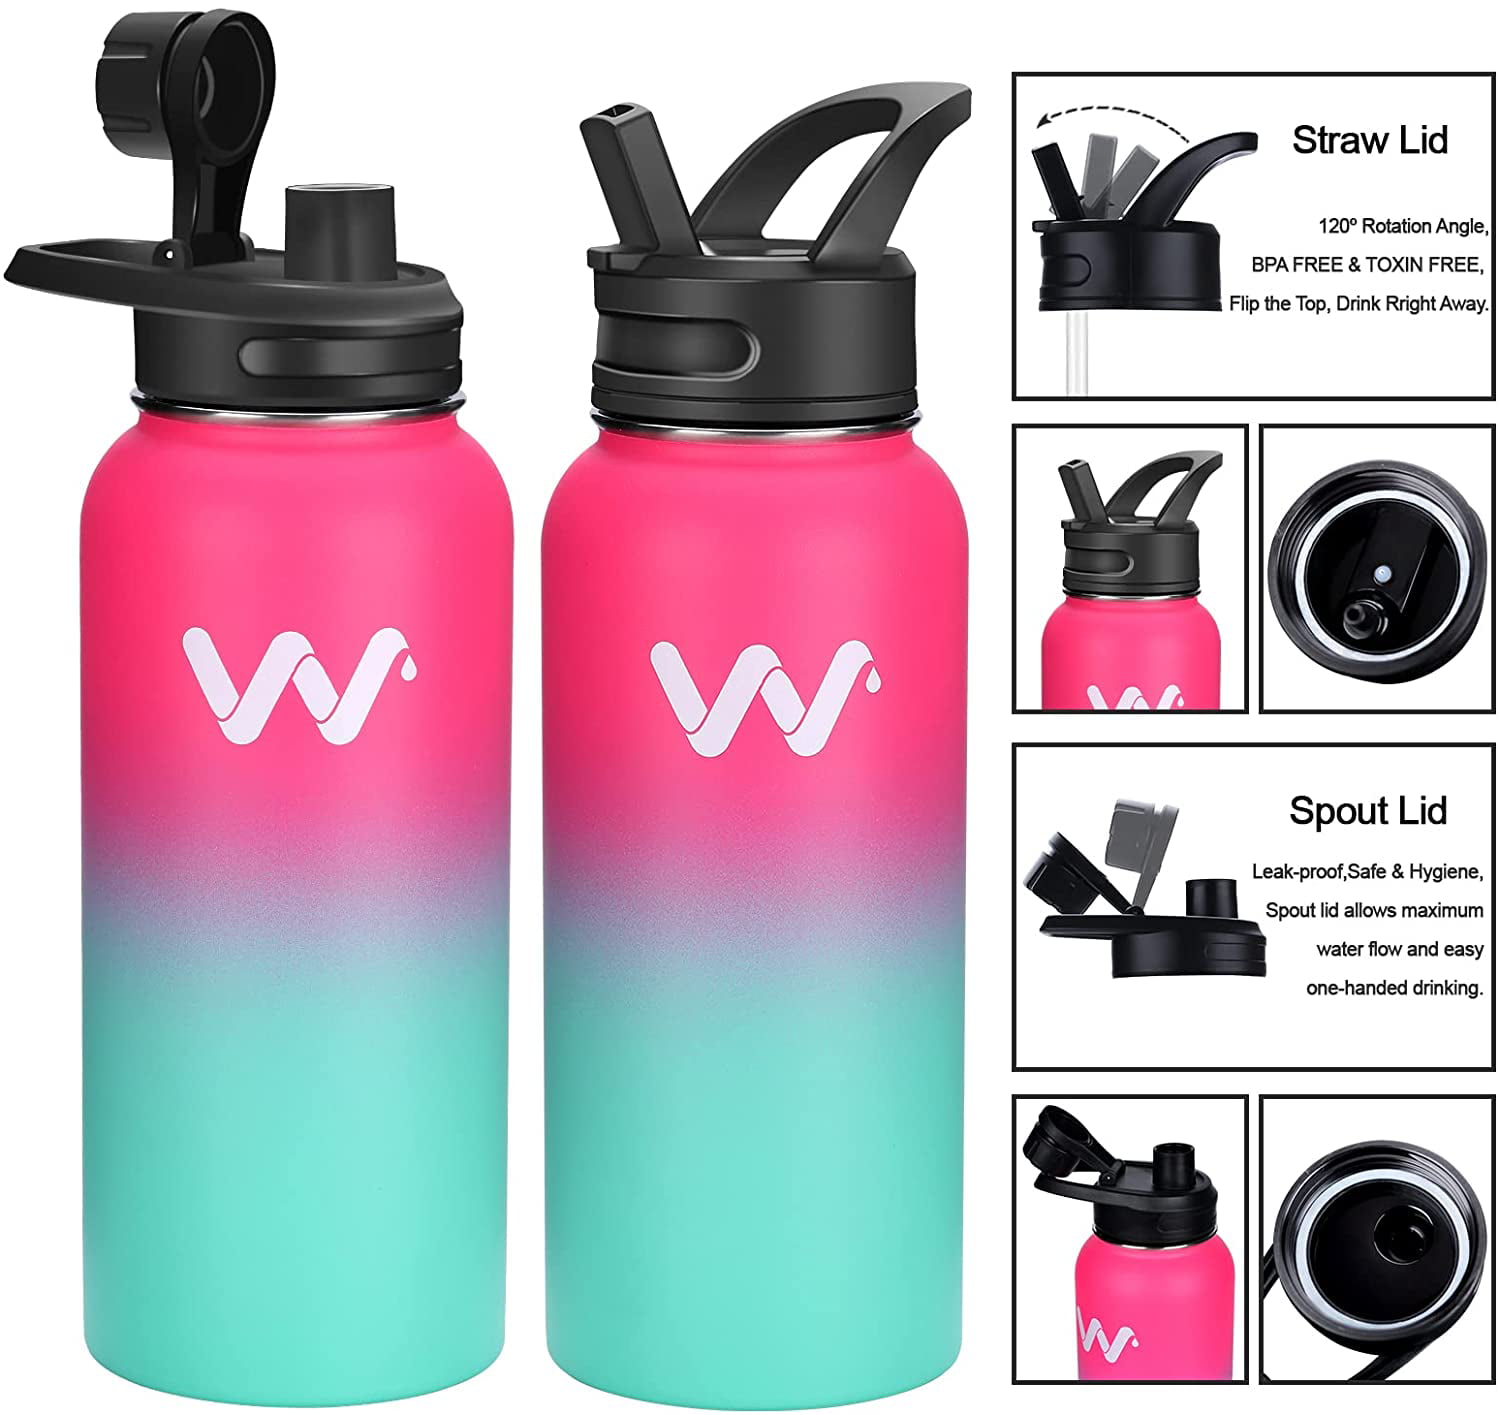 Pink Insulated Water Bottle - Includes 3 Lids (Straw Lid, Spout/Chug, Carabiner Handle), Leak Proof - 32 oz Water Bottles - by Onebottle